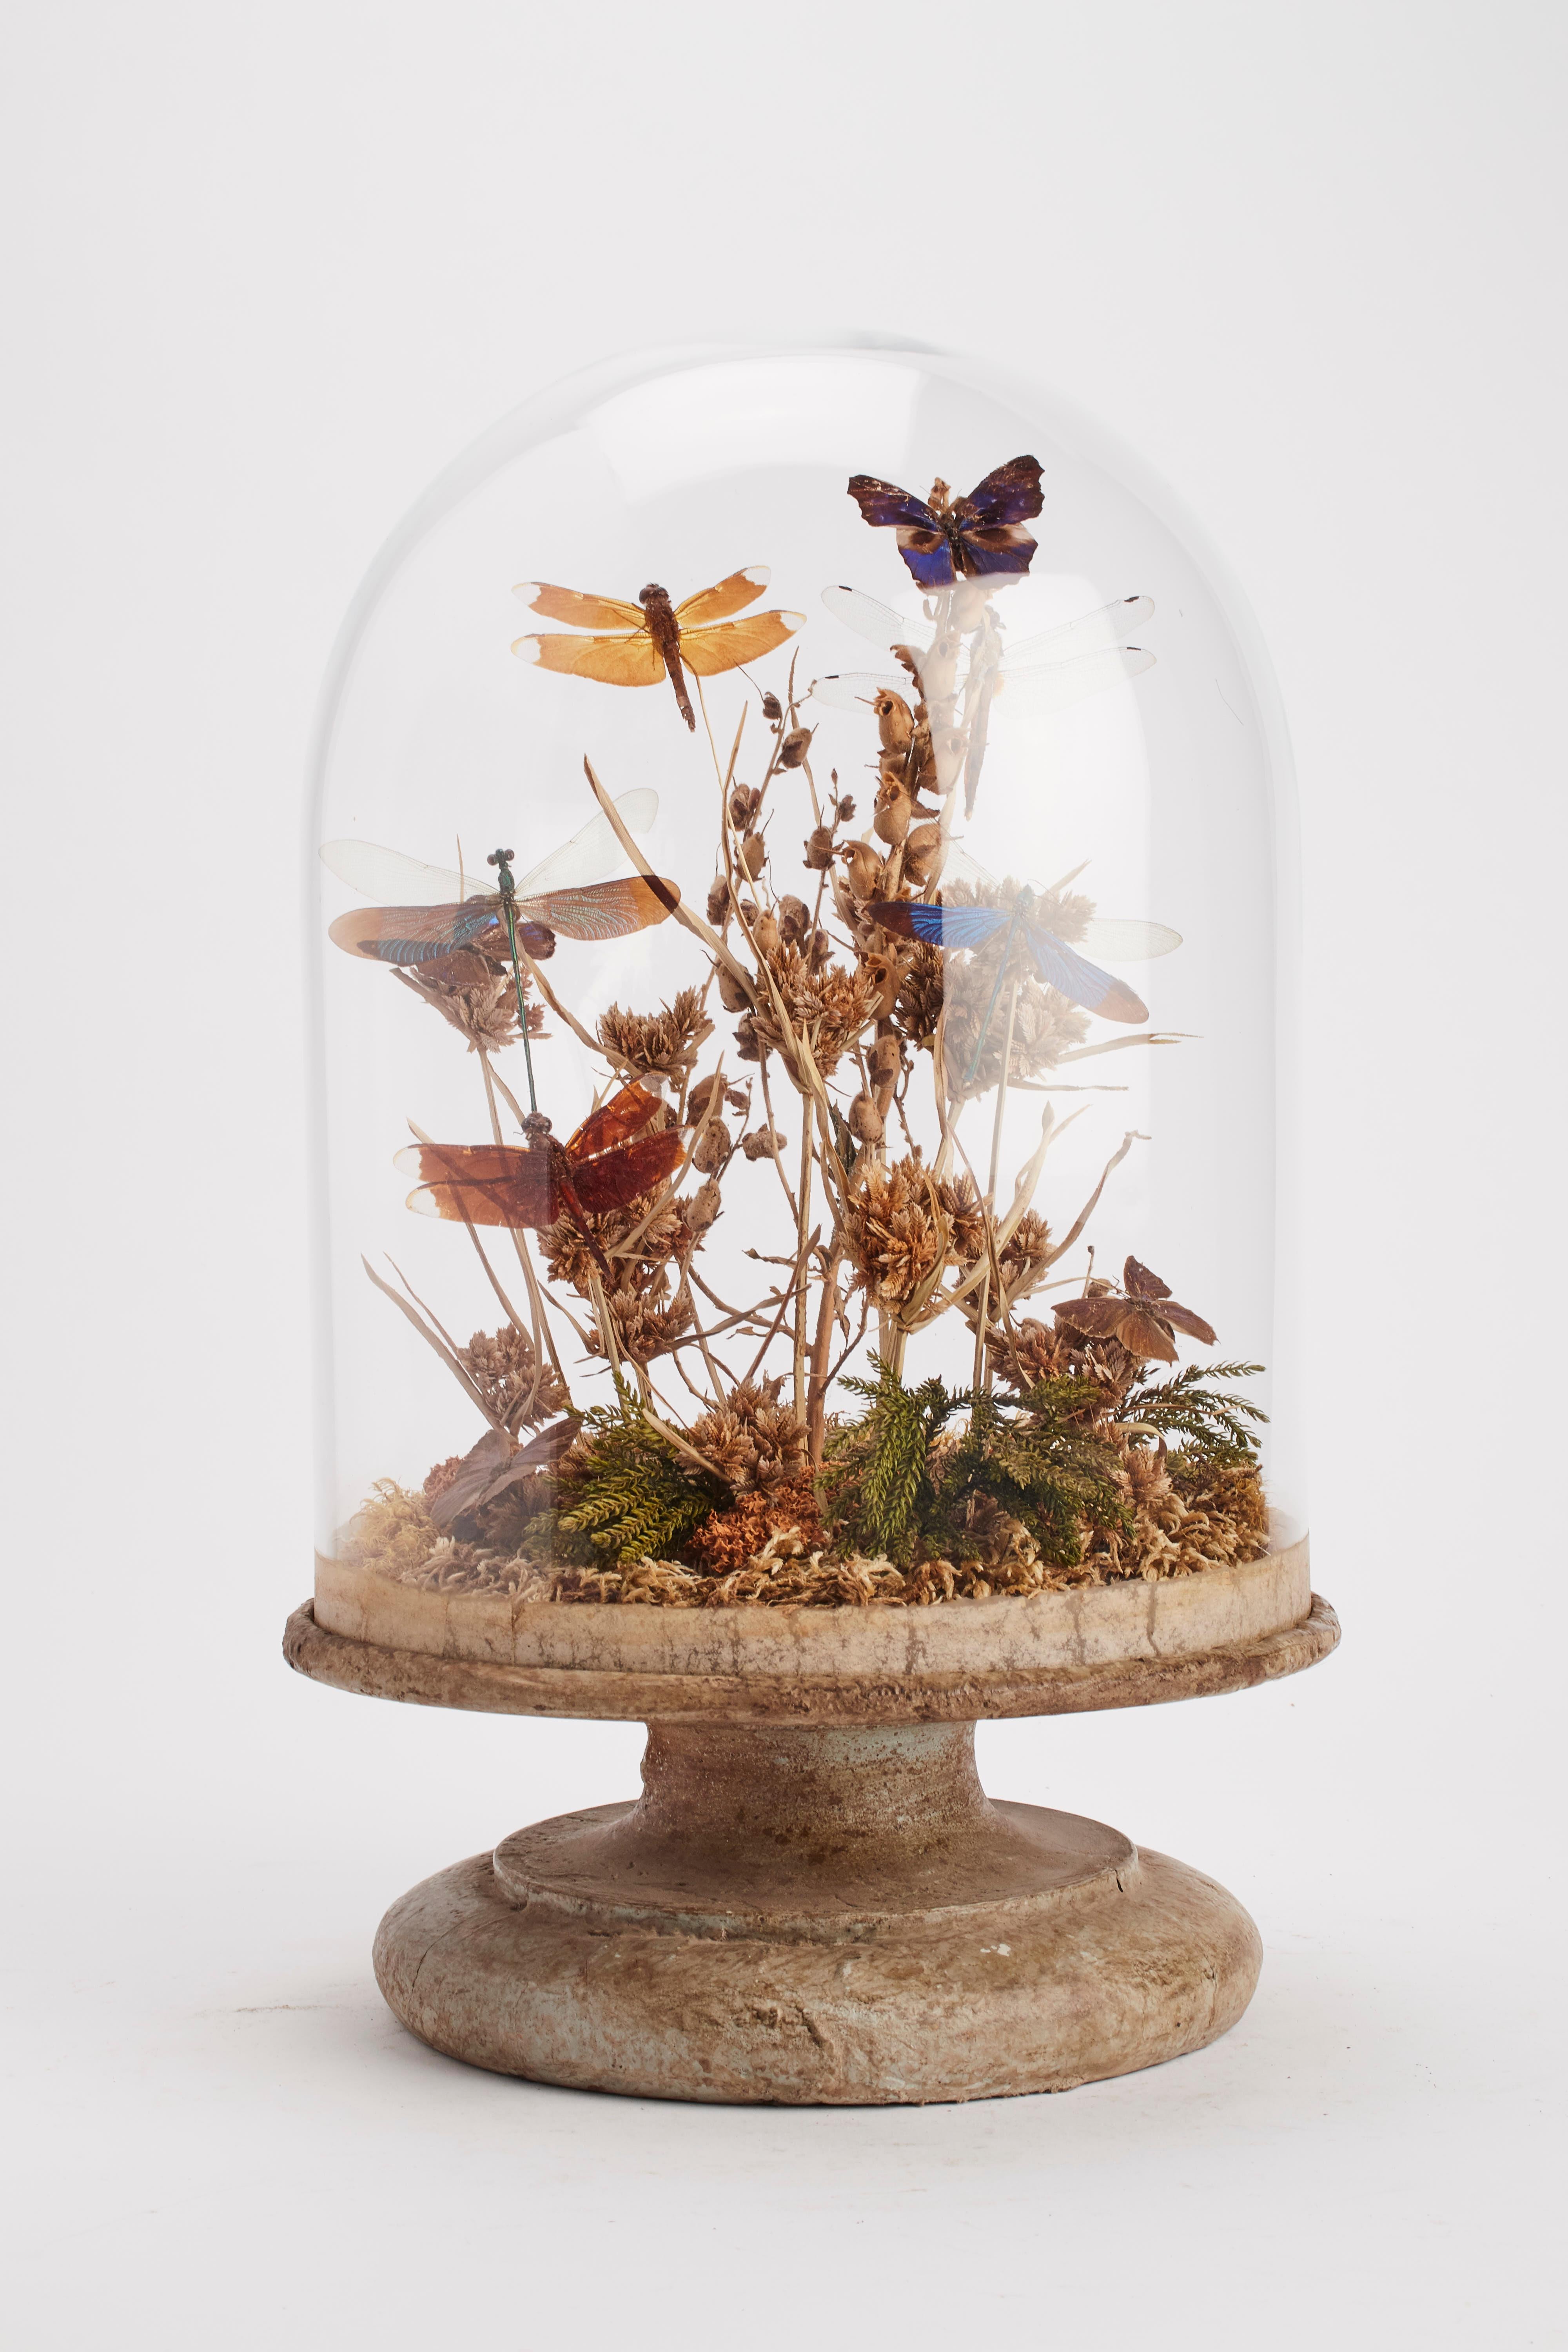 A Diorama with natural Wunderkammer specimens of butterflies and dragonflies leaned over a tree branch willing over moss the specimens are mounted inside an oval glass dome over a blue-gray painted wooden base, Italy, 1870.